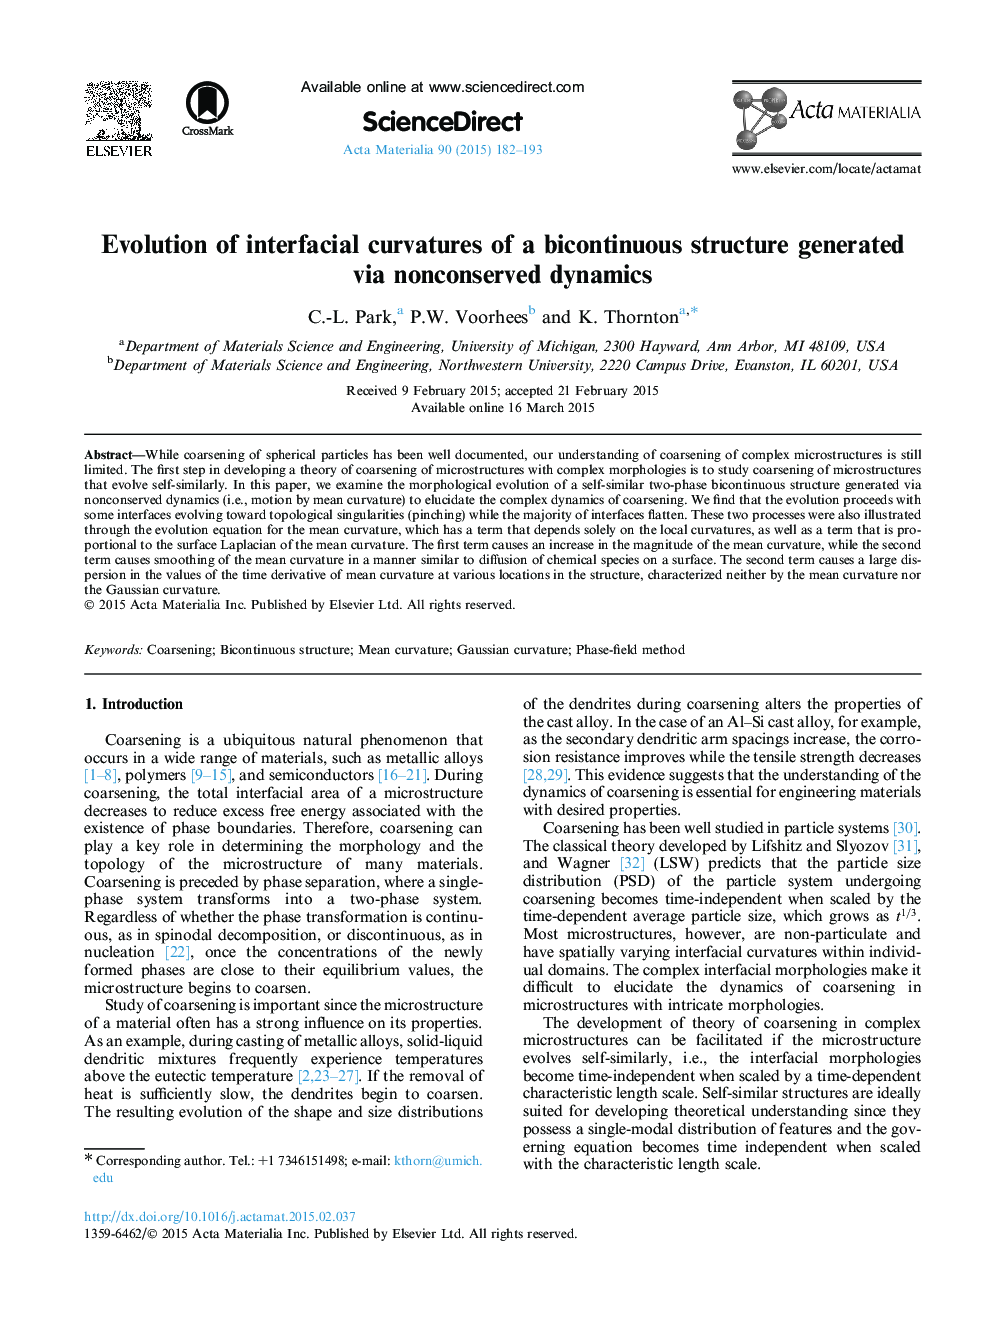 Evolution of interfacial curvatures of a bicontinuous structure generated via nonconserved dynamics